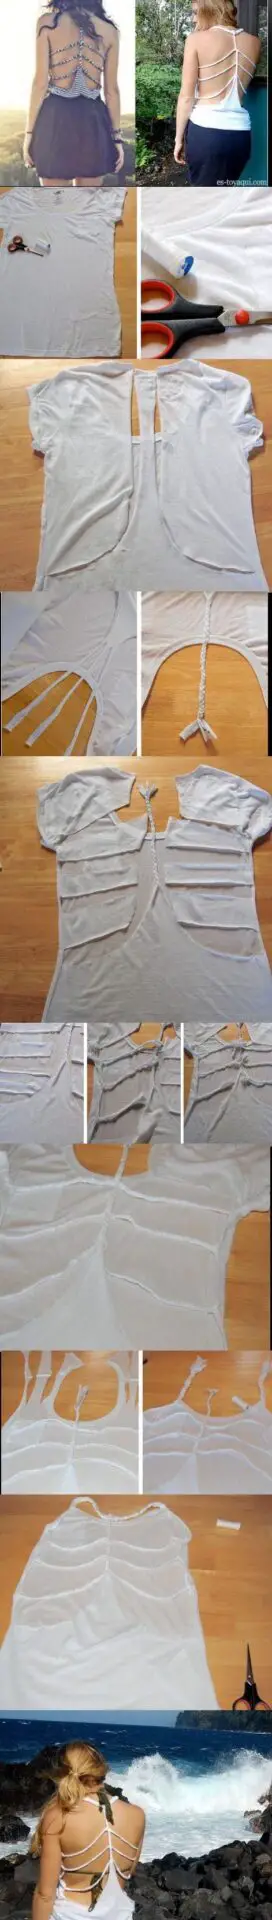 braided-shirt-how-to-1